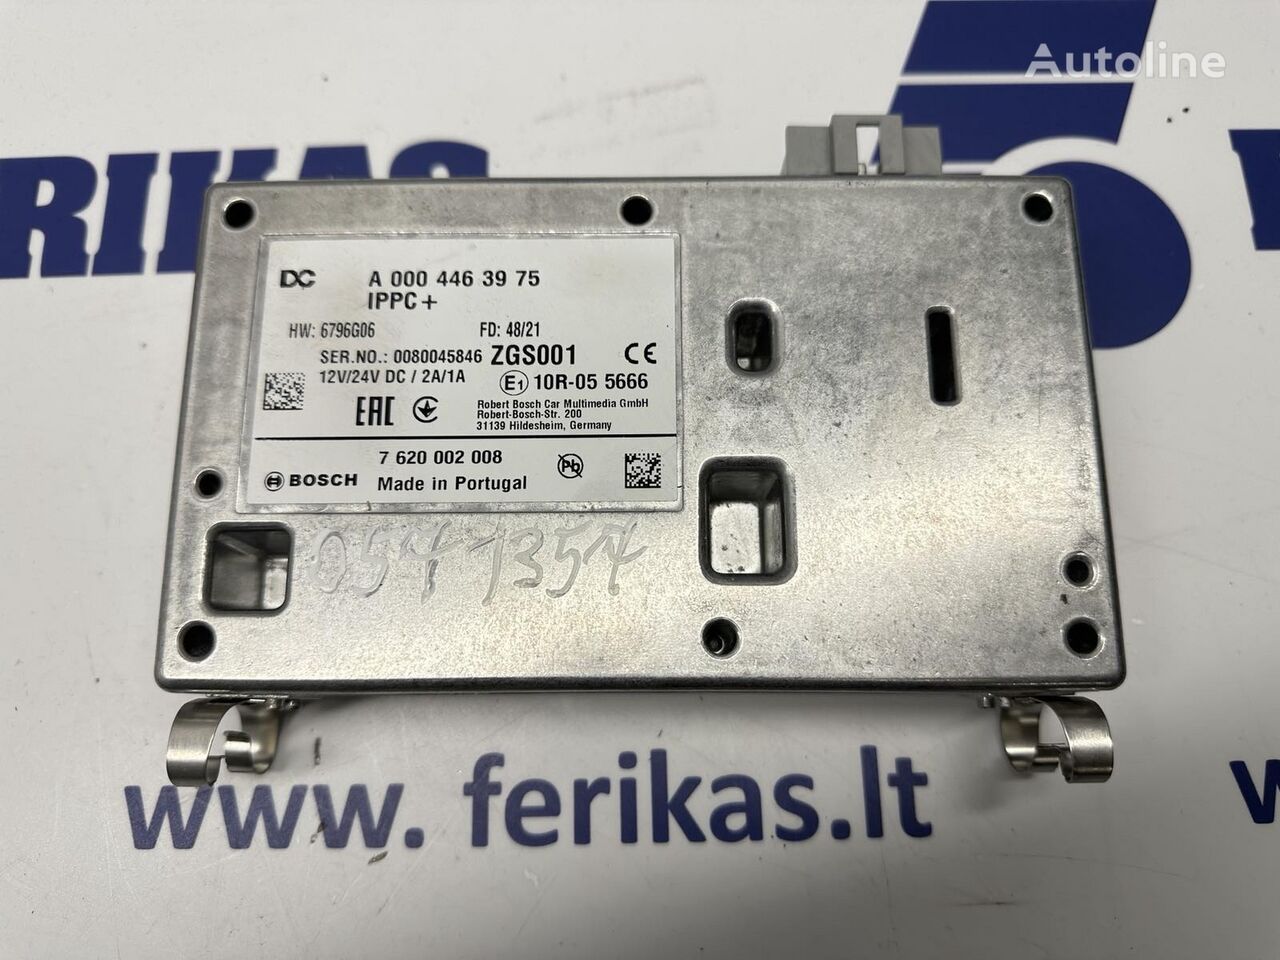 IPPC+ A0004463975 control unit for Mercedes-Benz Actros MP5 truck tractor